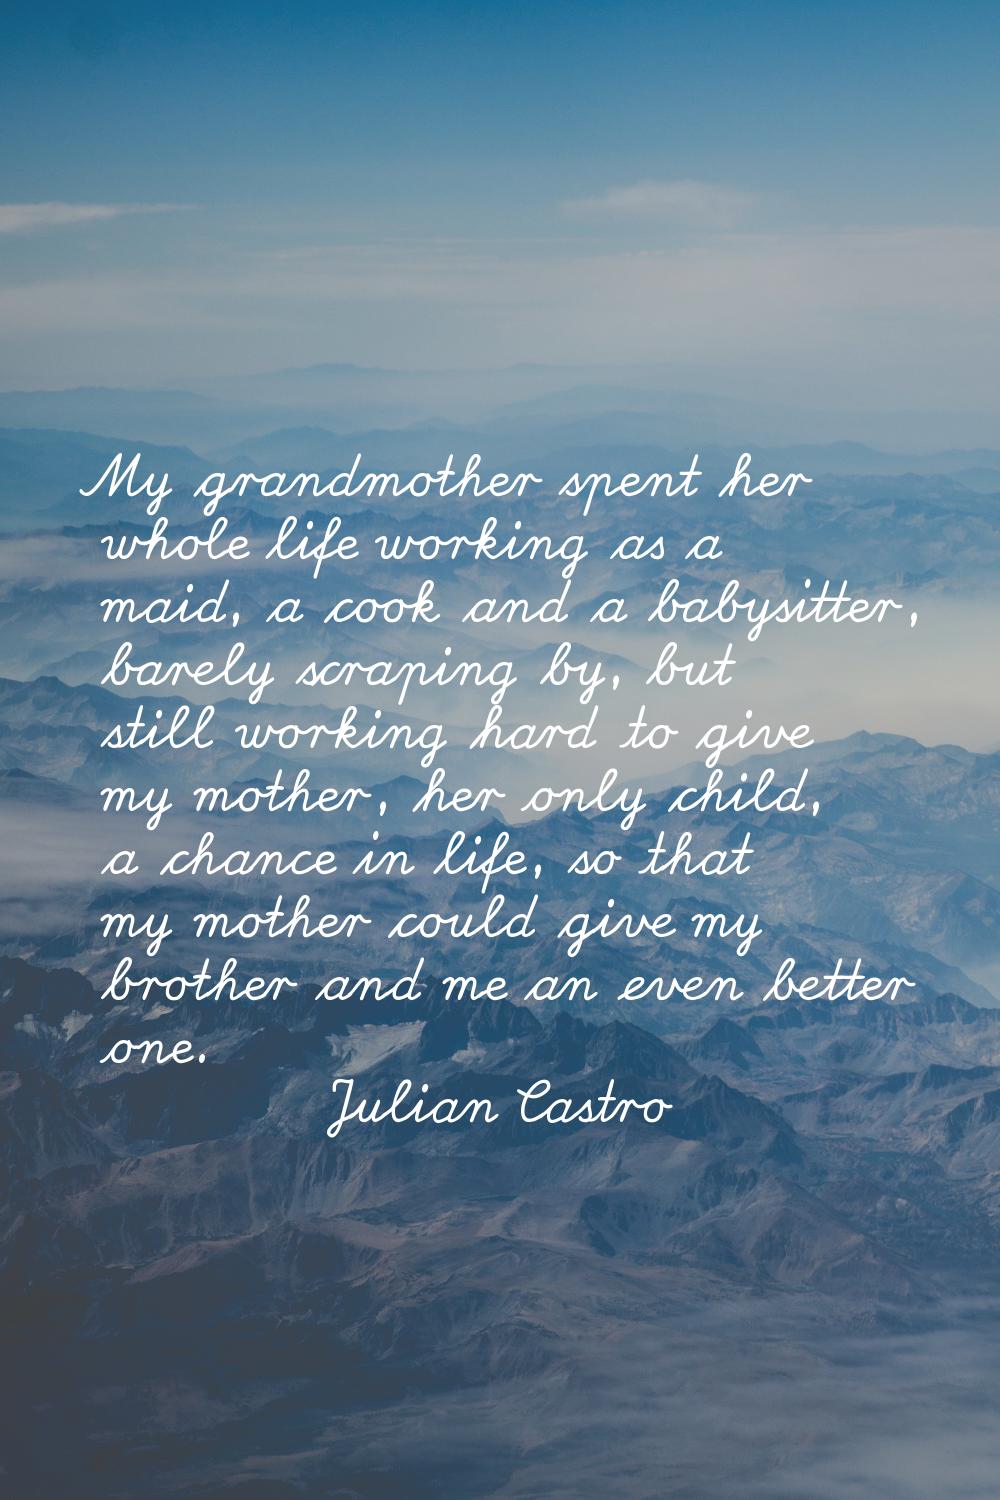 My grandmother spent her whole life working as a maid, a cook and a babysitter, barely scraping by,